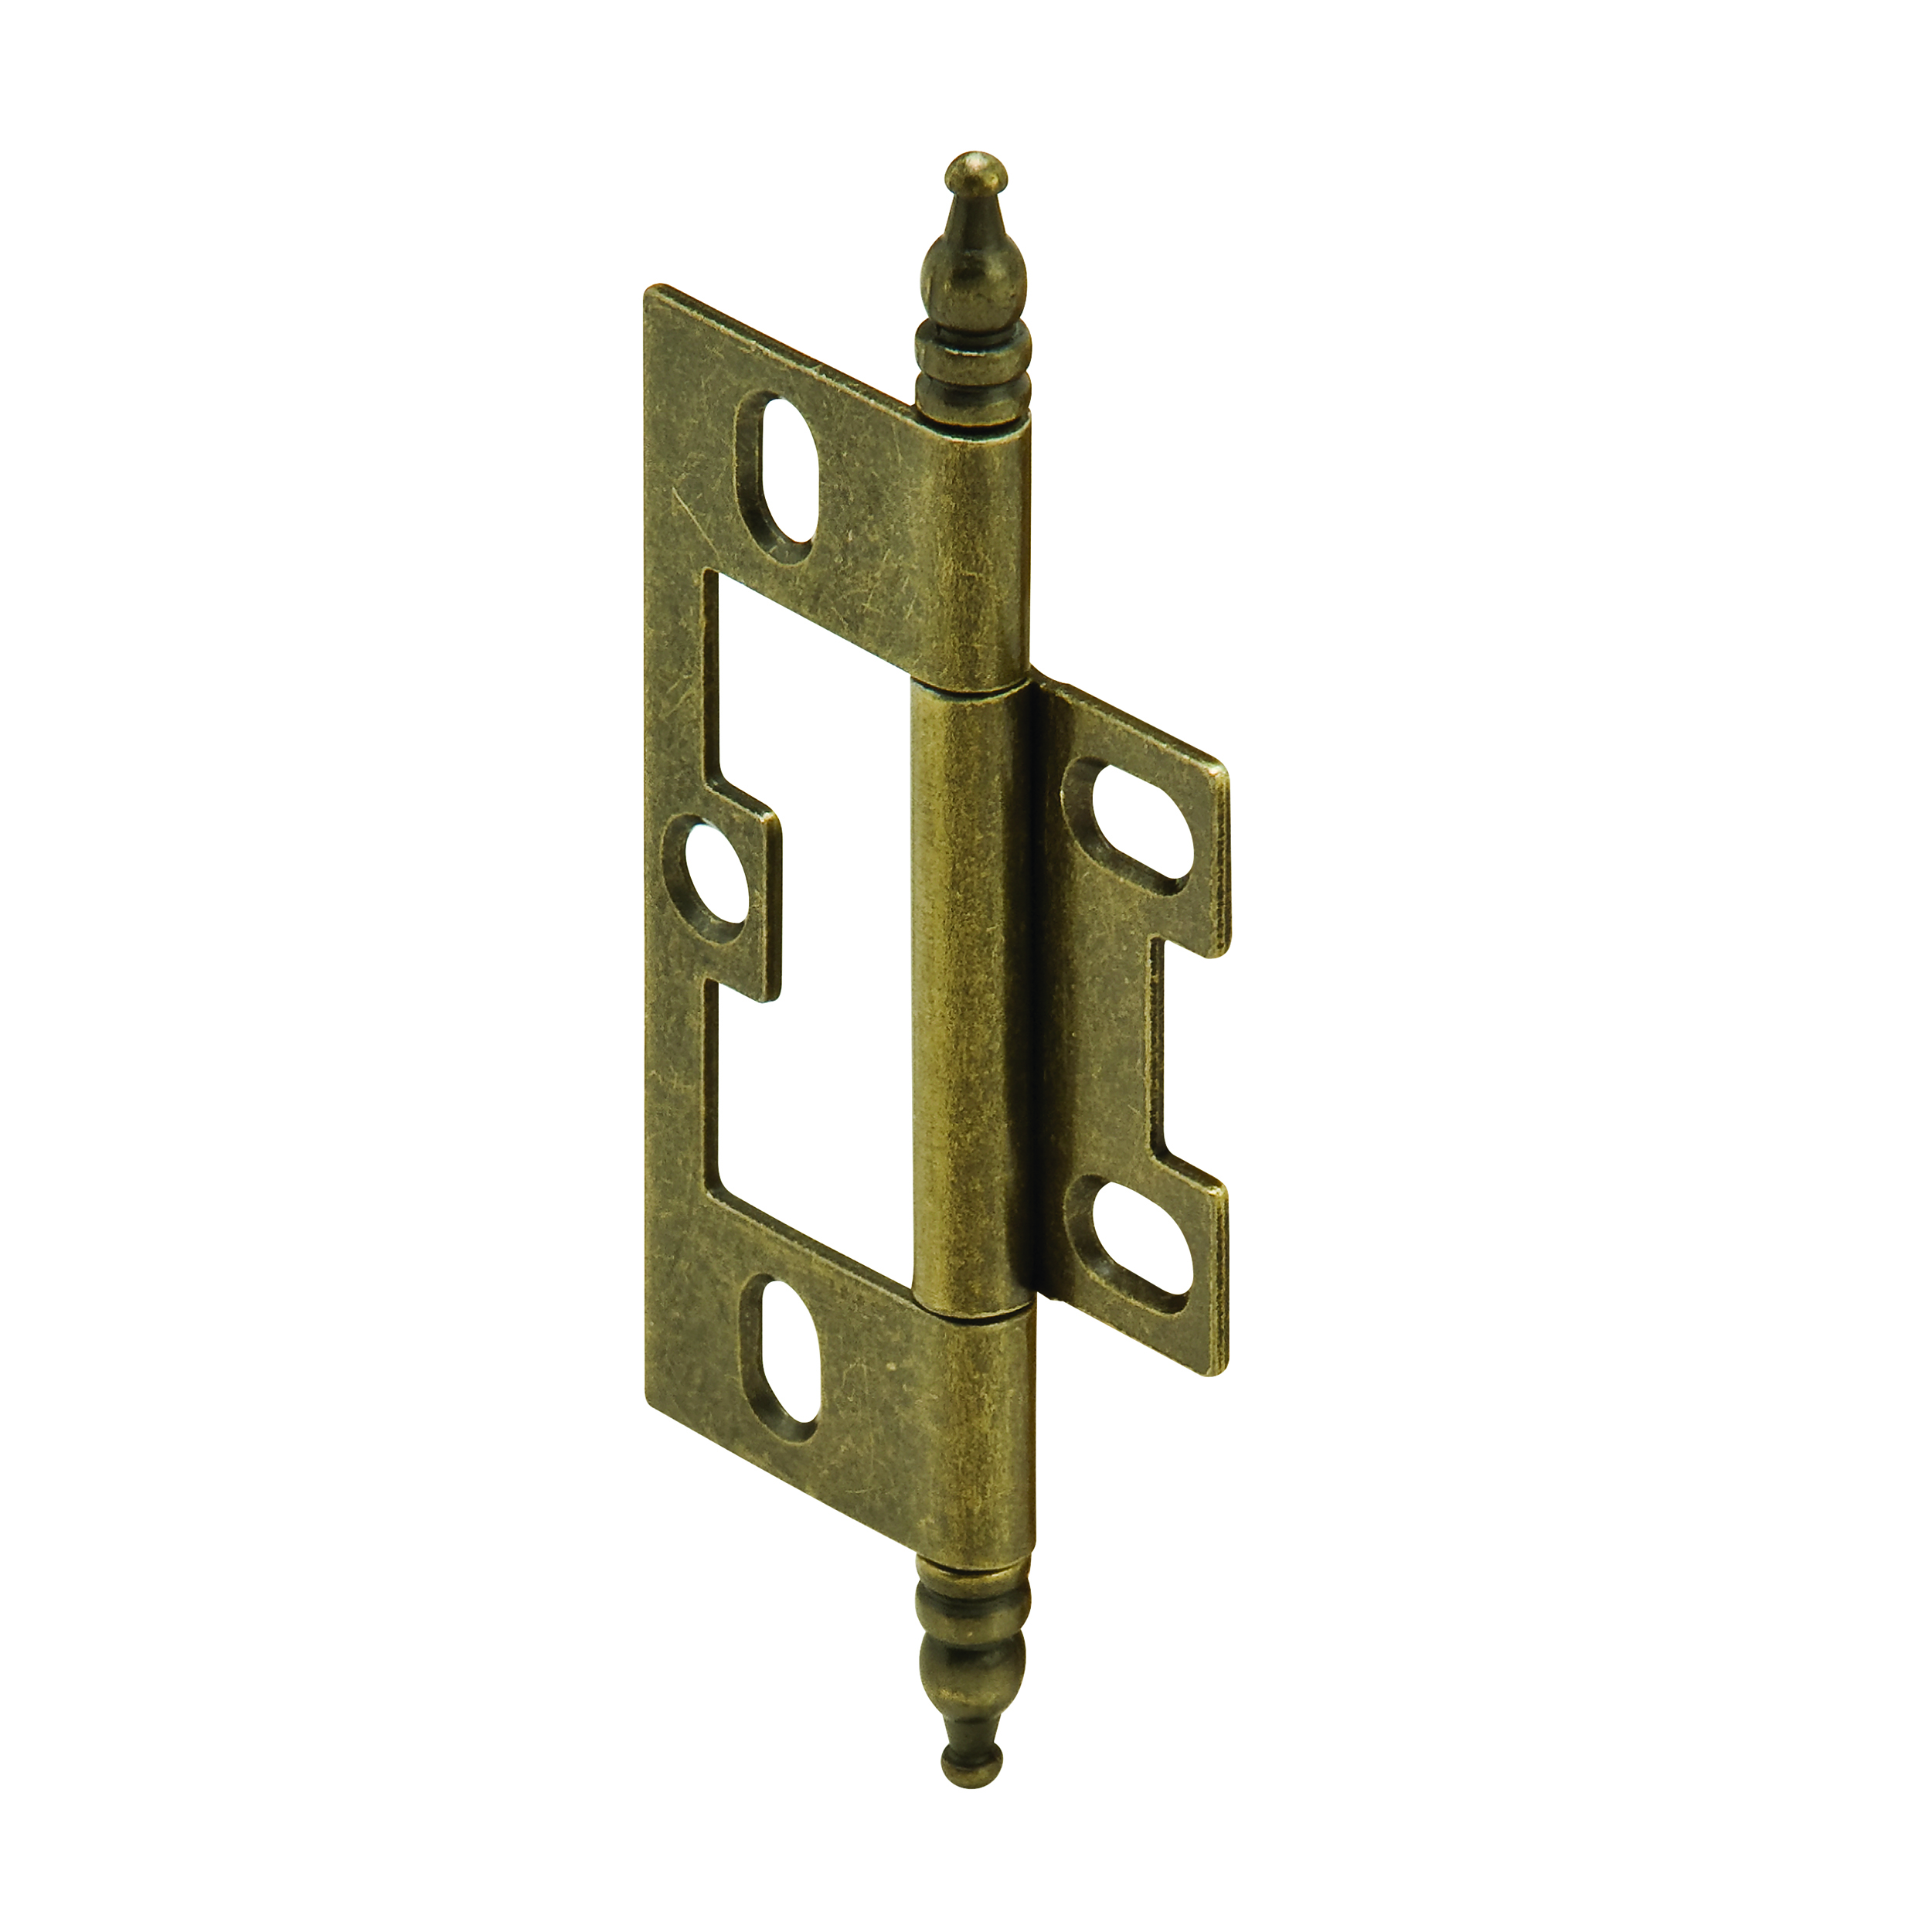 Non-mortised Decorative Butt Hinge With Finial In Antique Brass - Model# 351.95.170